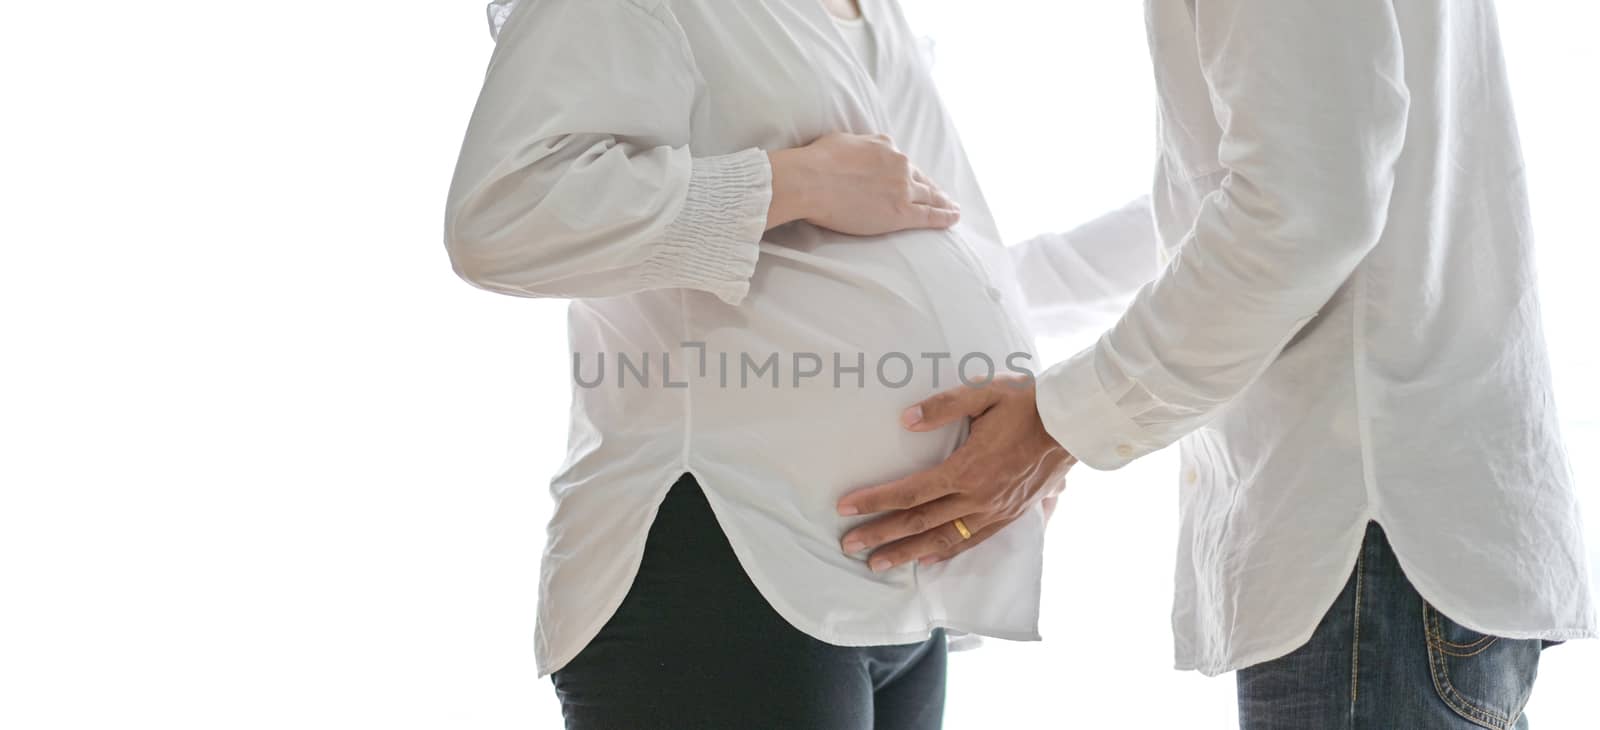 Men standing and embrace pregnant women. by poungsaed